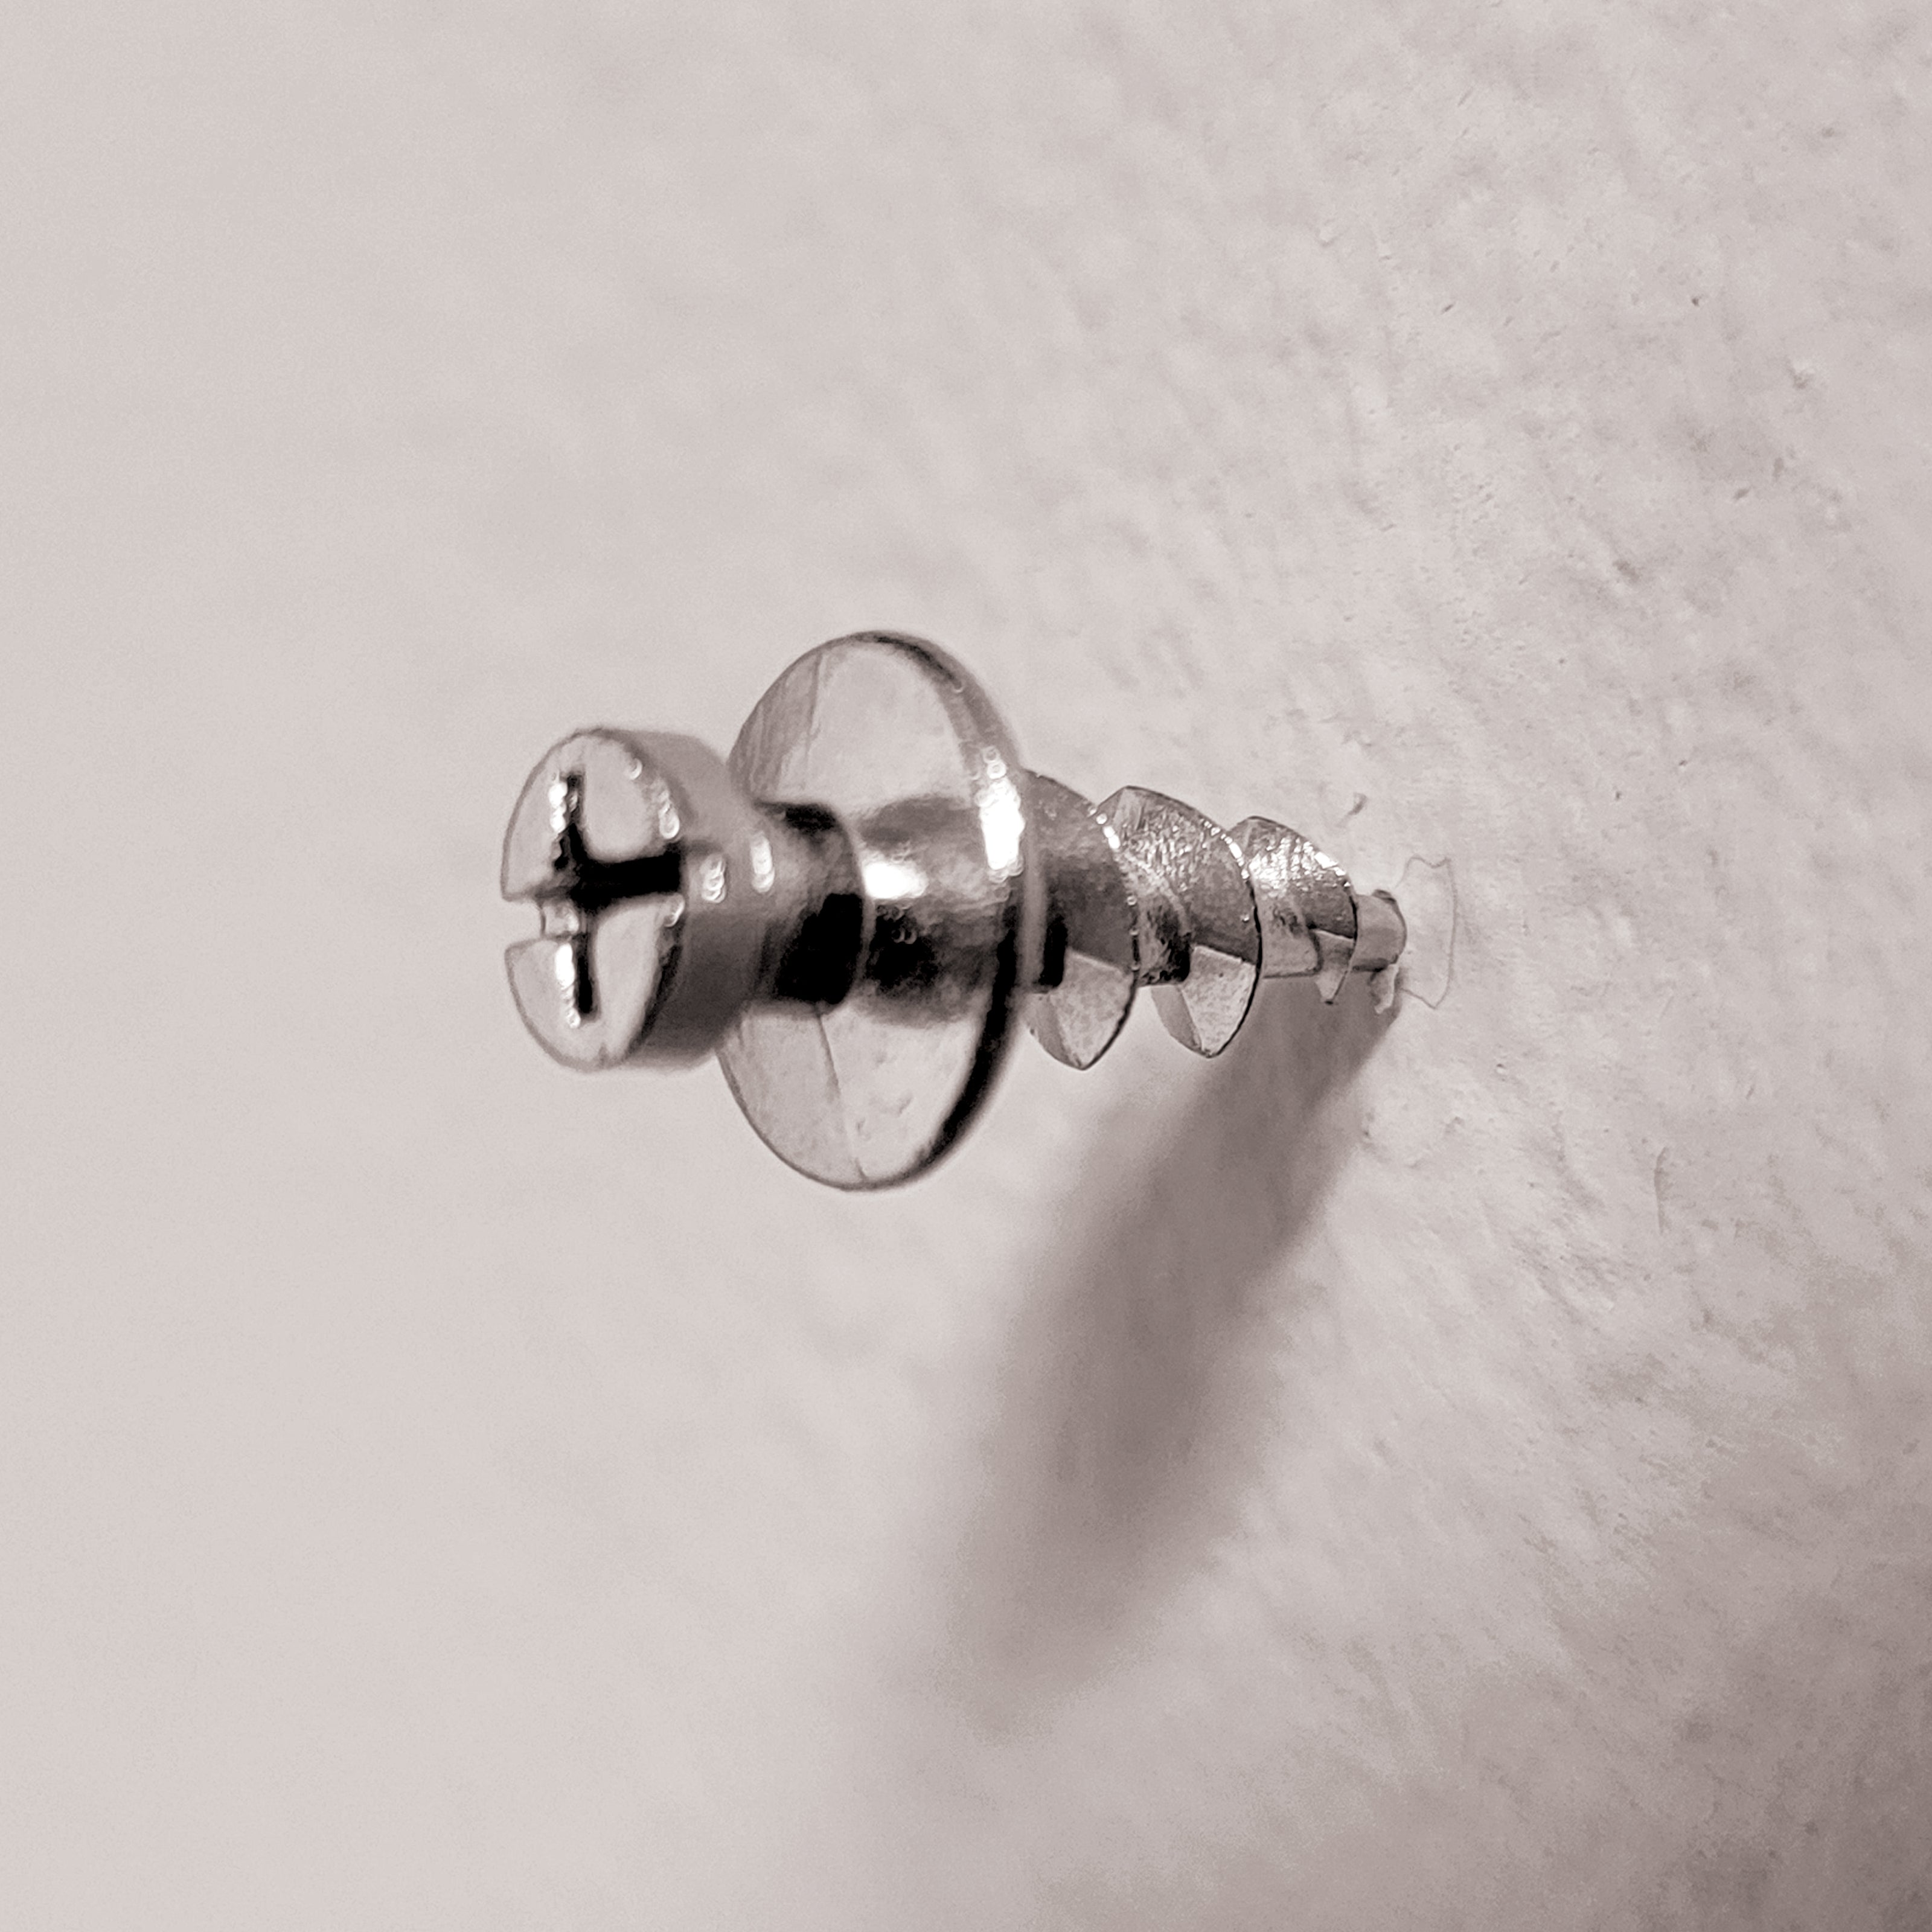 a self-drilling screw for hanging pictures